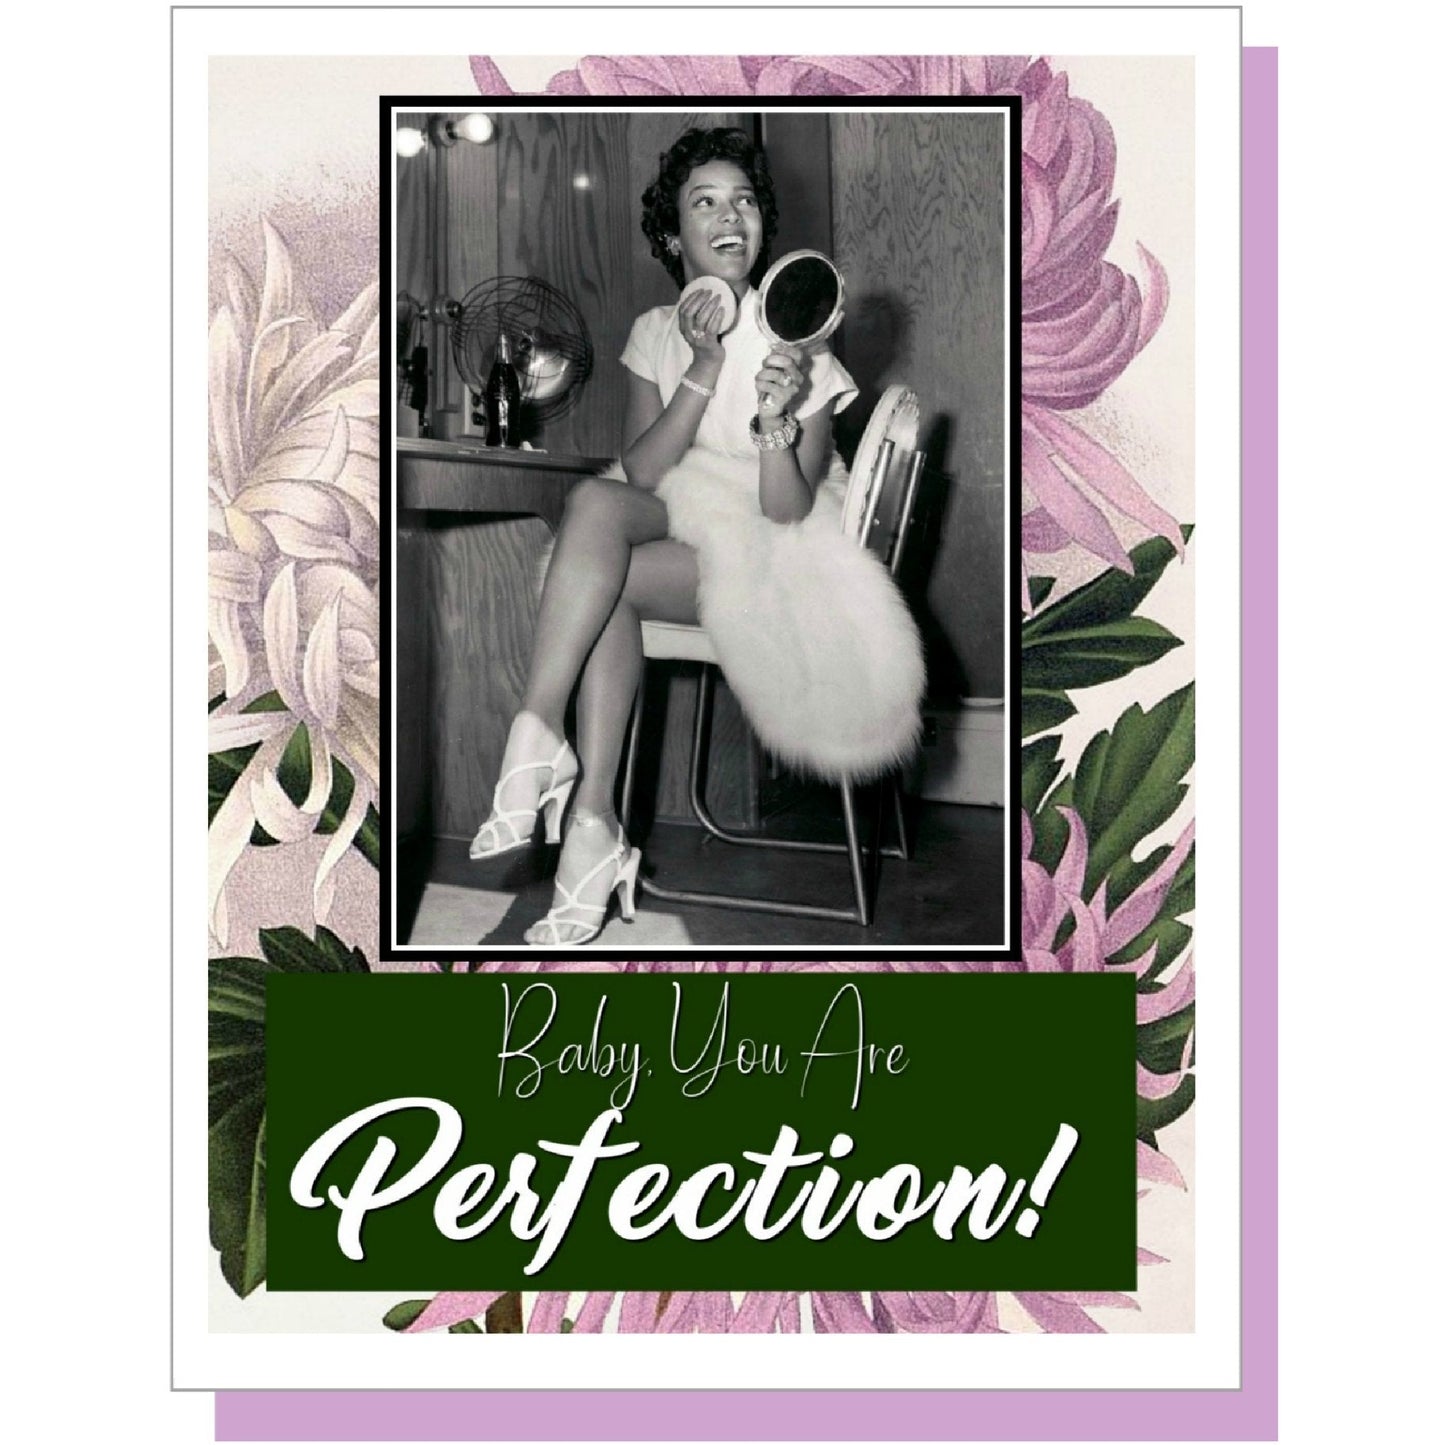 Baby You Are Perfection Retro Valentine Greeting Card